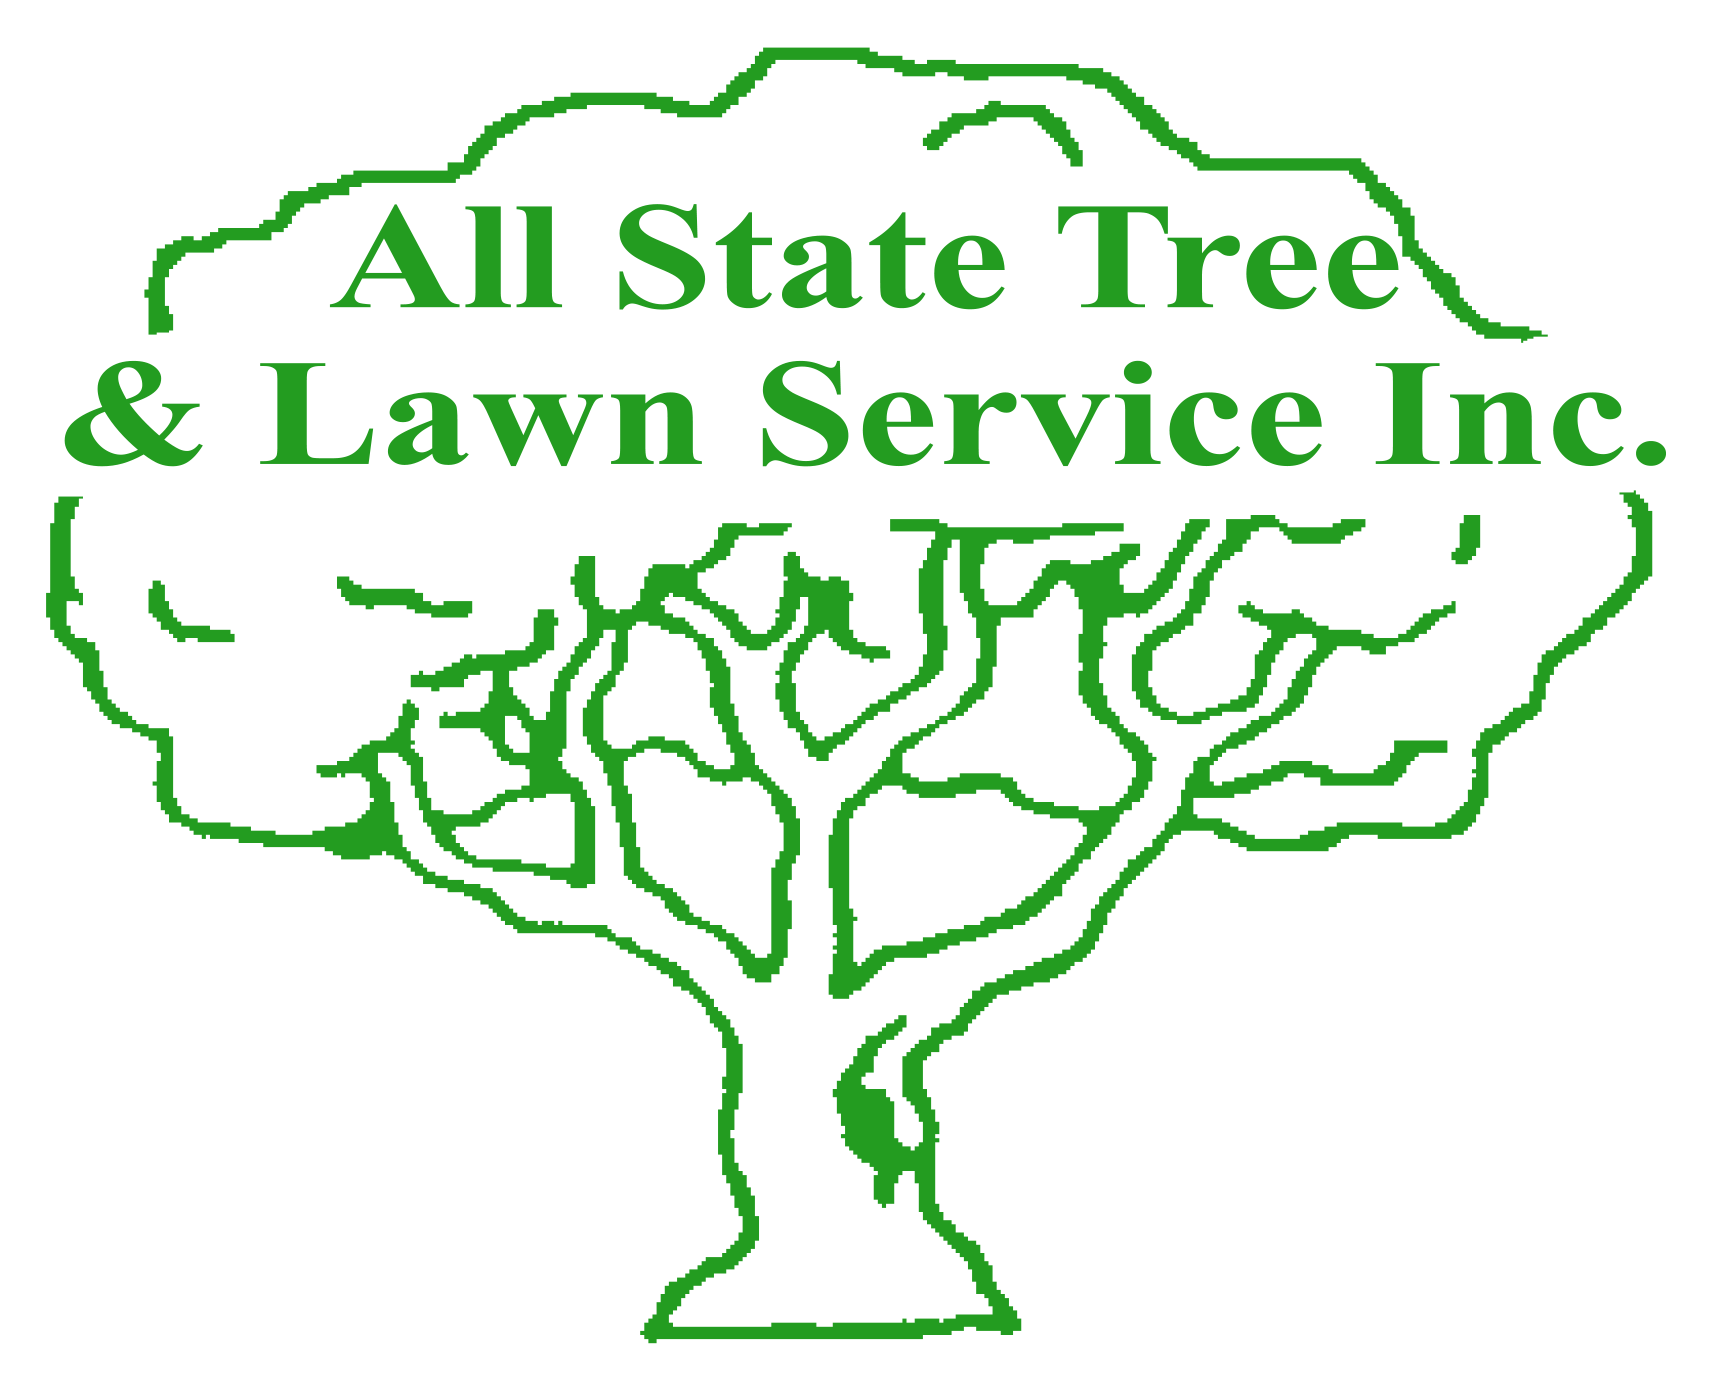 All State Tree & Lawn Service Inc.